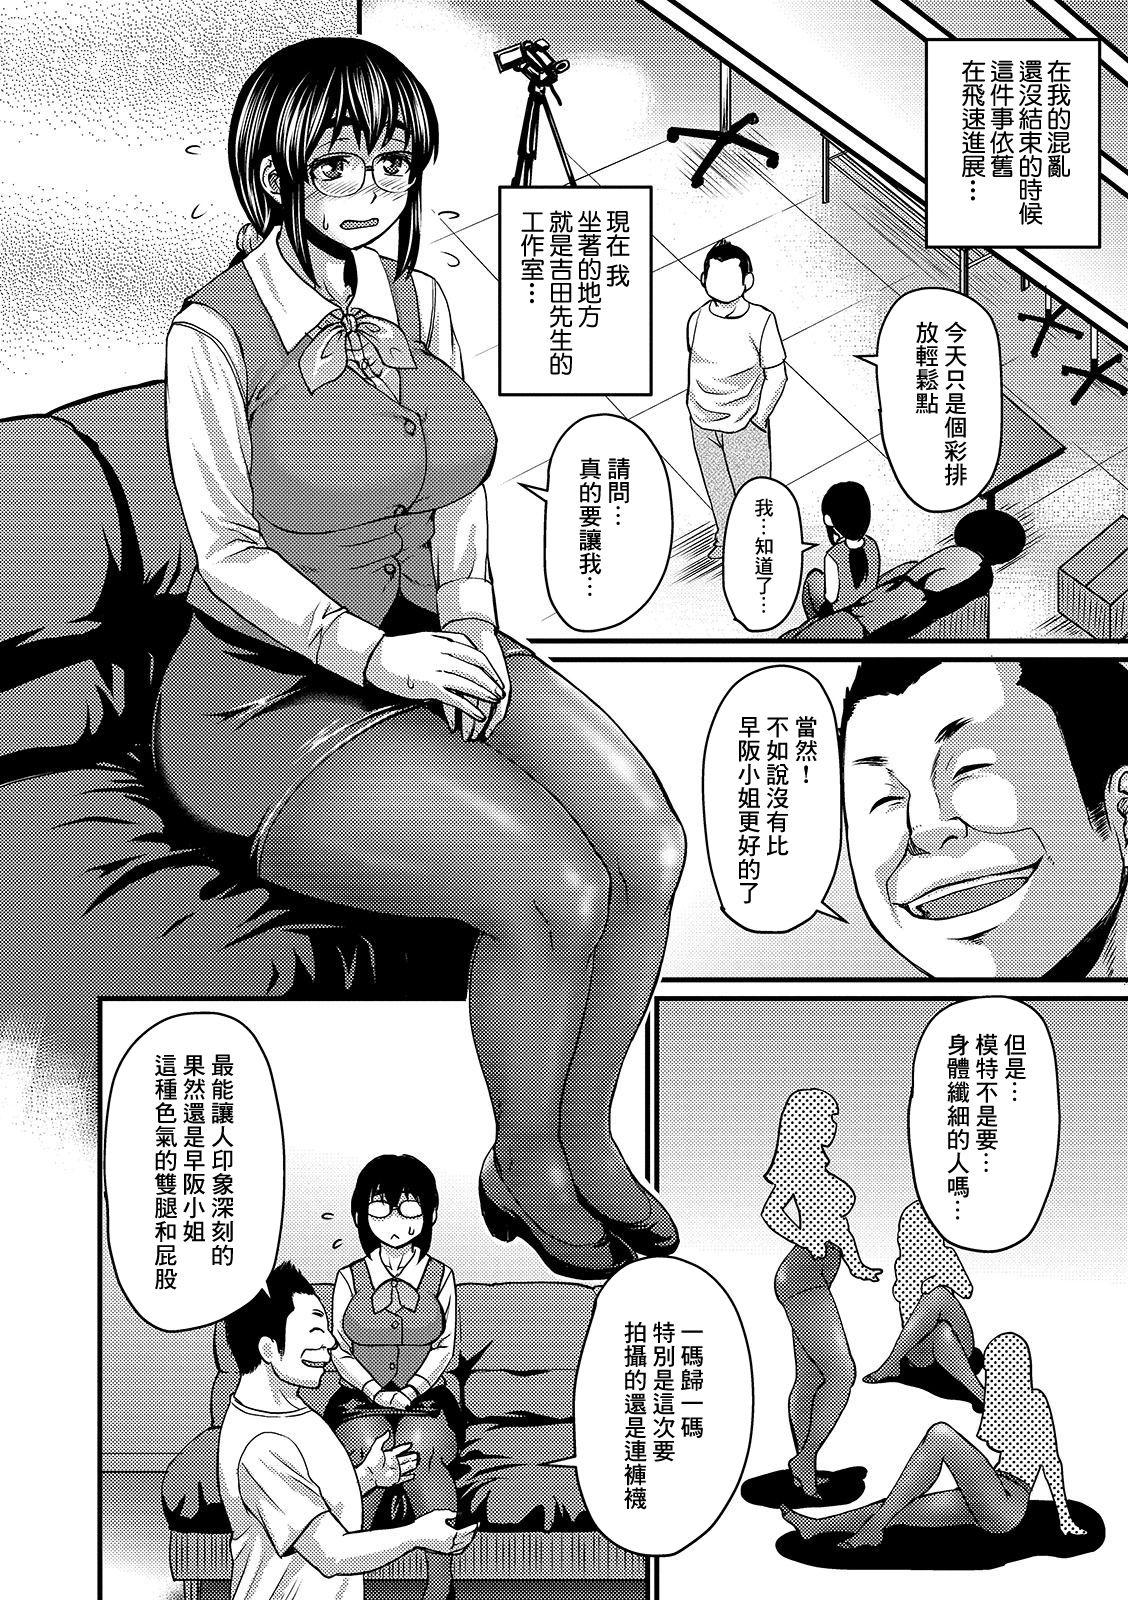 Cunt 早坂さんのムチ蒸れパンスト撮影 Public Nudity - Page 4